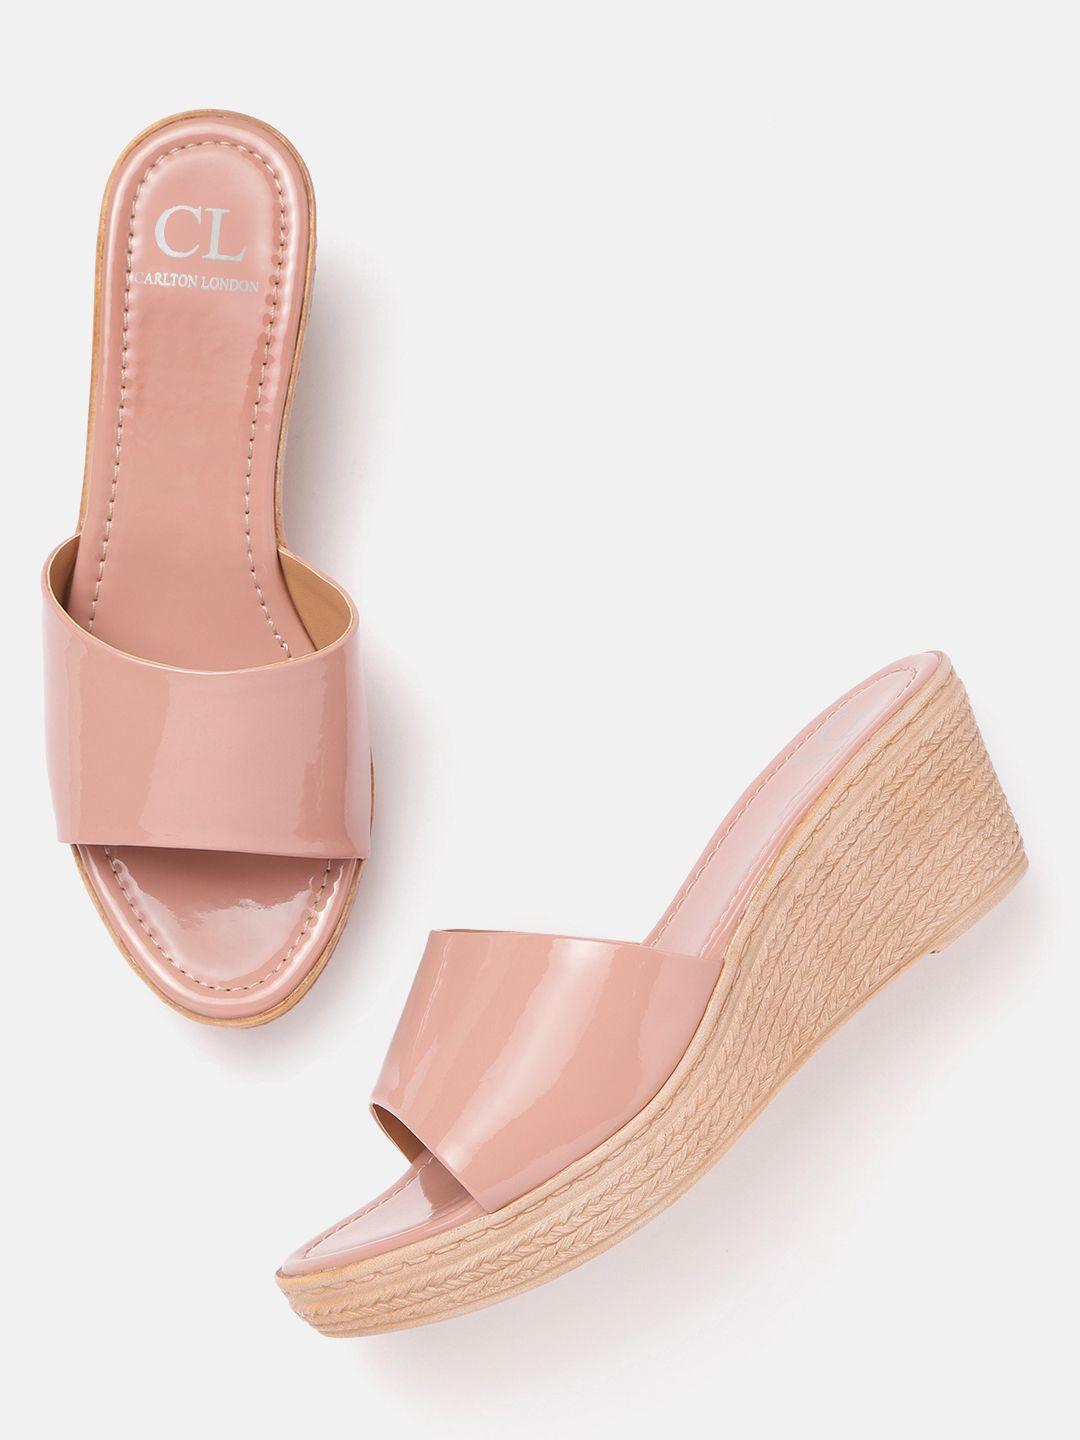 carlton london nude-coloured solid patent finish wedges